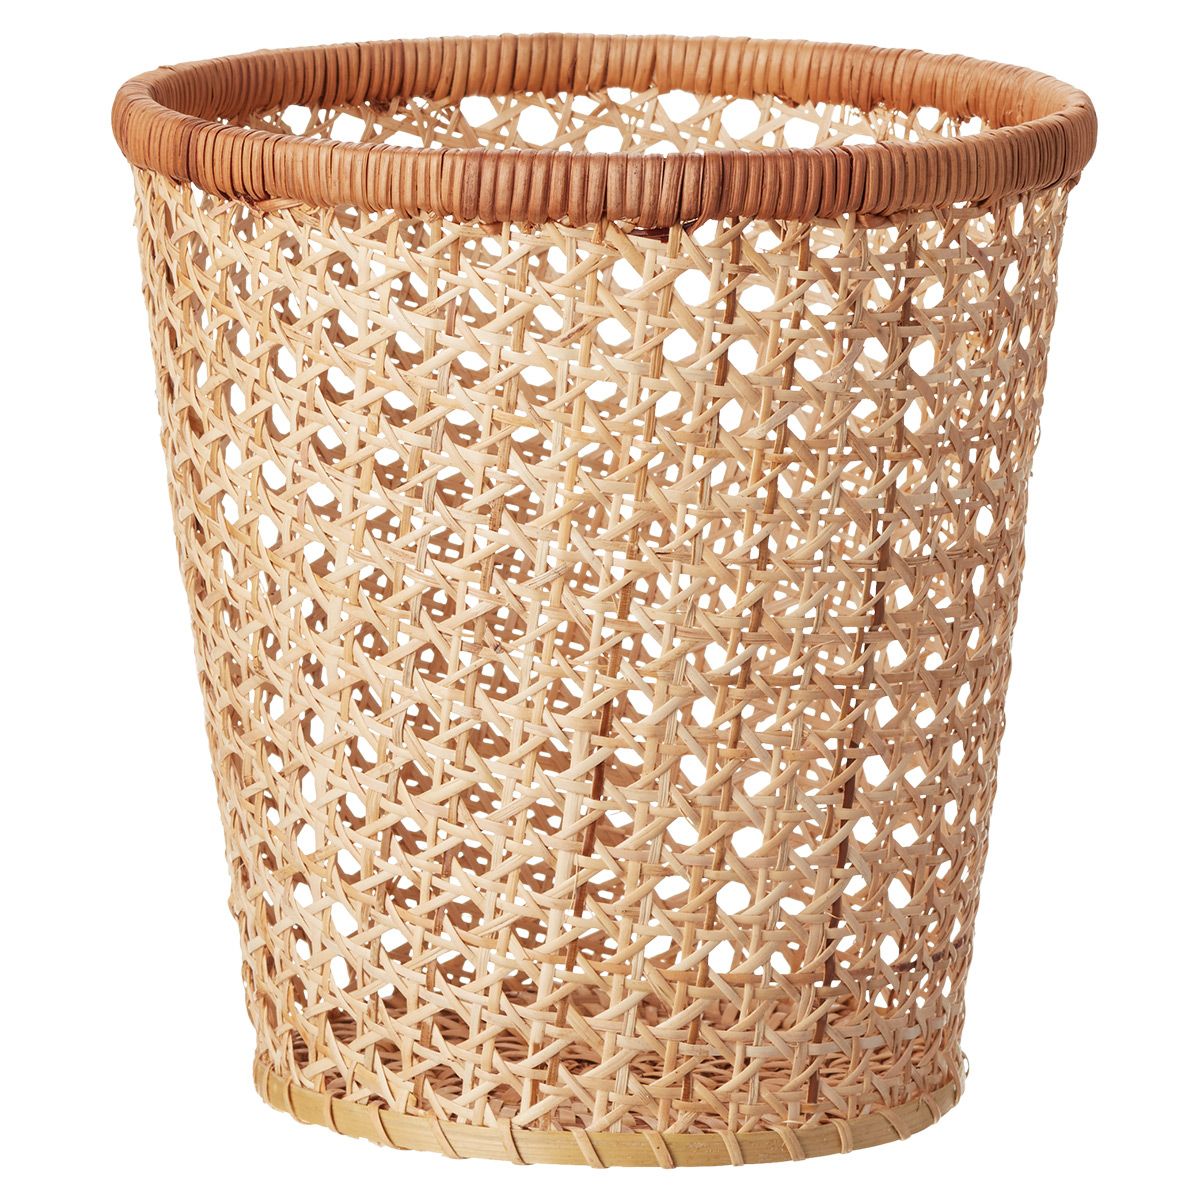 Albany Rattan Trash Can Natural | The Container Store